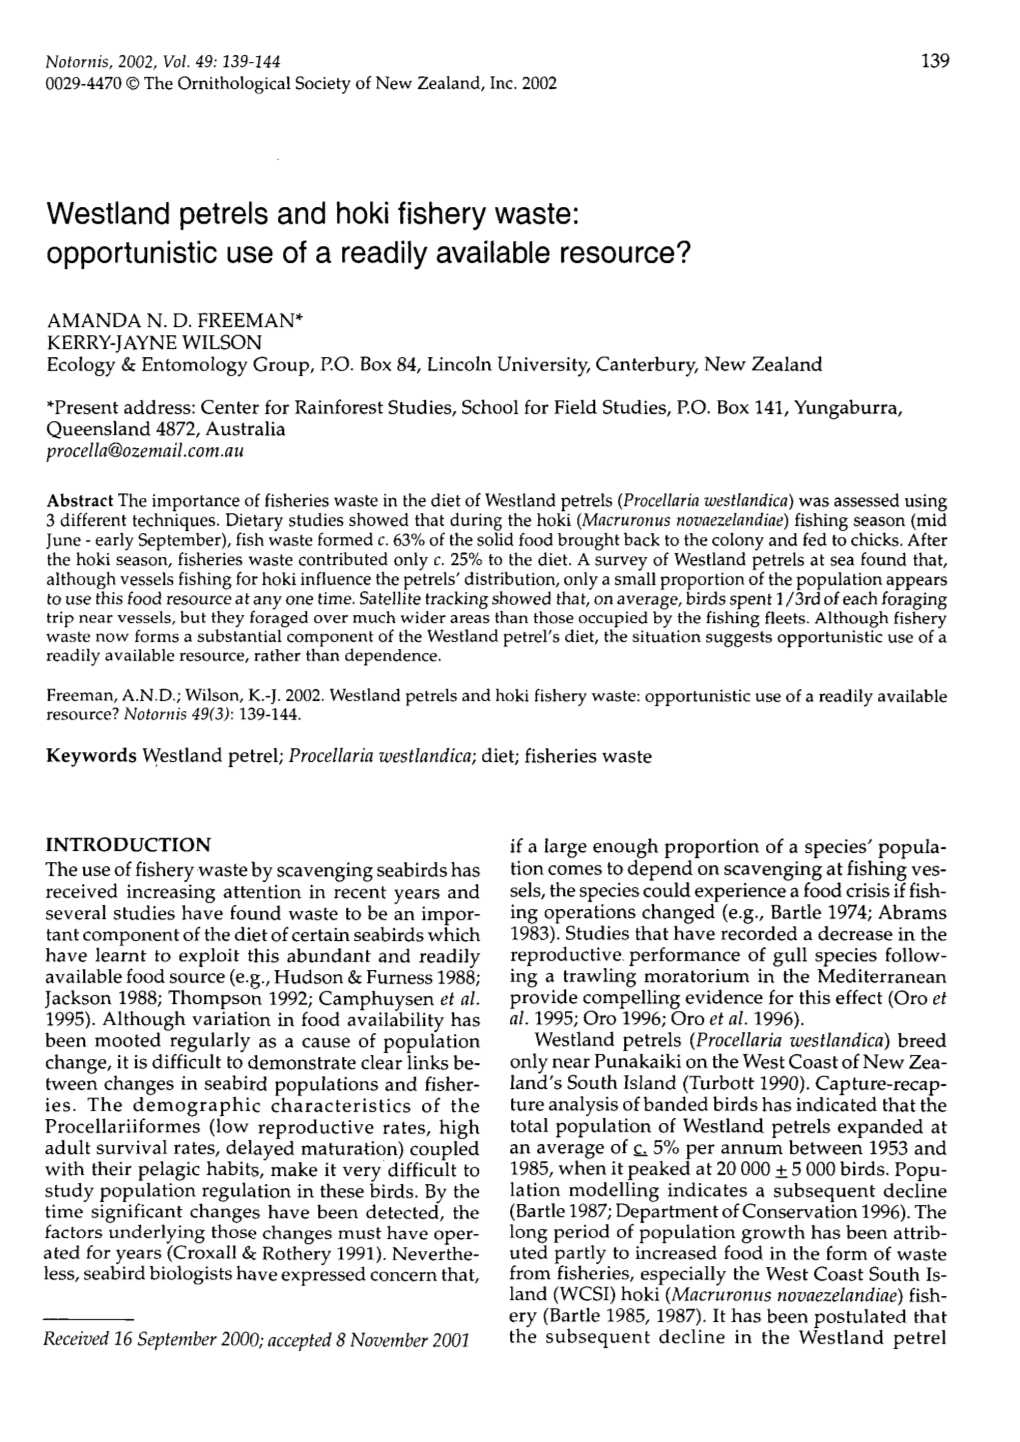 Westland Petrels and Hoki Fishery Waste: Opportunistic Use of a Readily Available Resource?